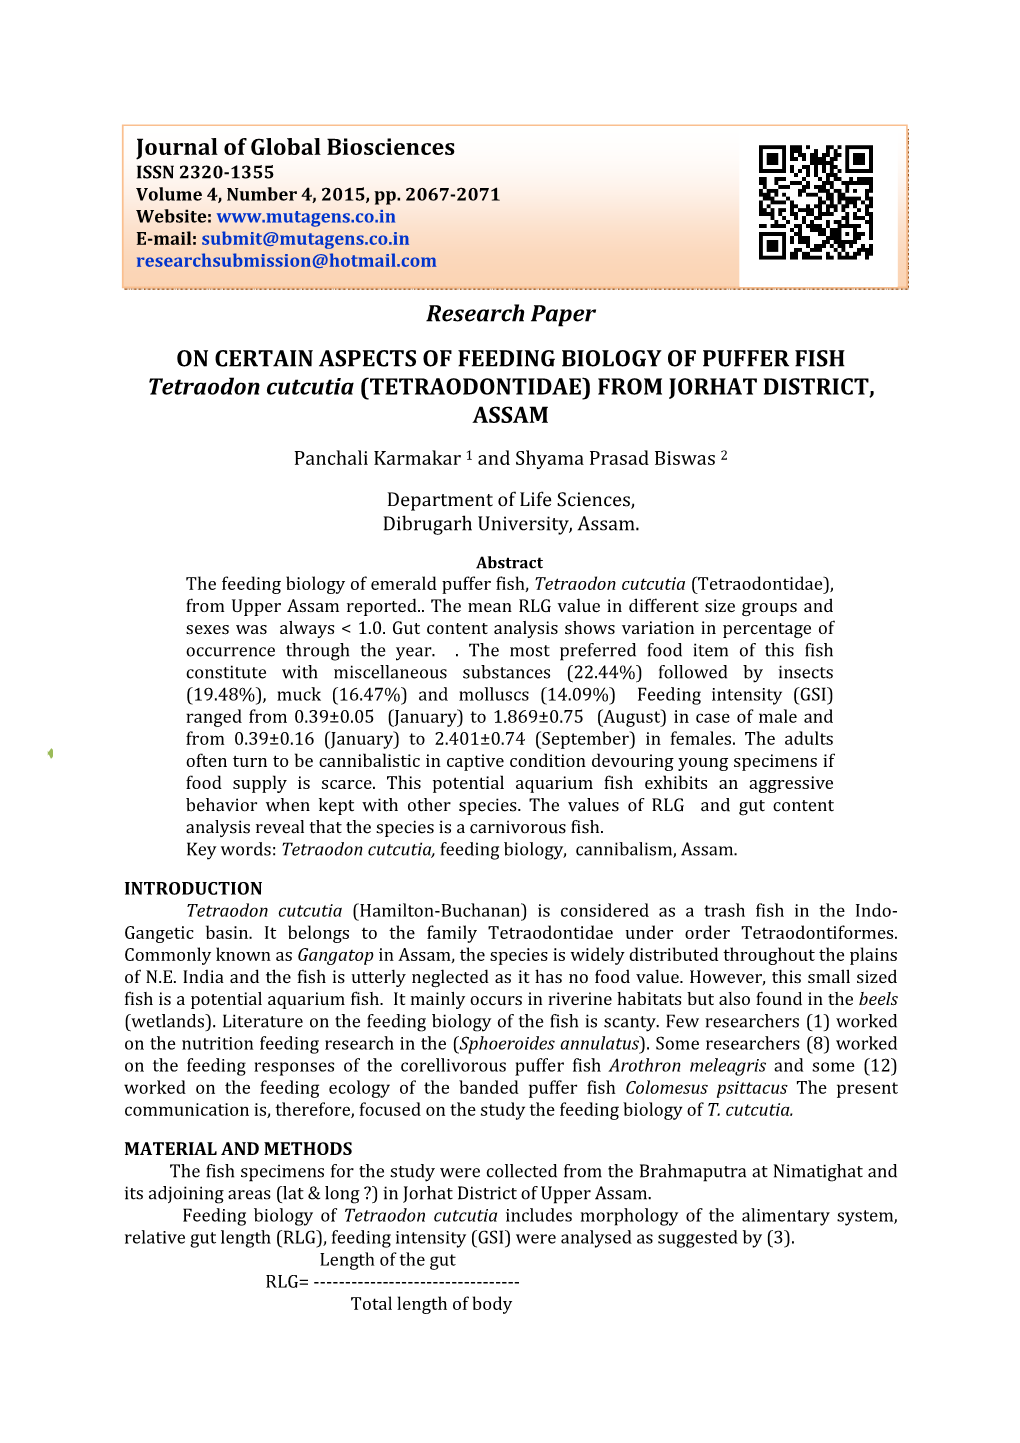 Research Paper on CERTAIN ASPECTS of FEEDING BIOLOGY of PUFFER FISH Tetraodon Cutcutia (TETRAODONTIDAE) from JORHAT DISTRICT, ASSAM